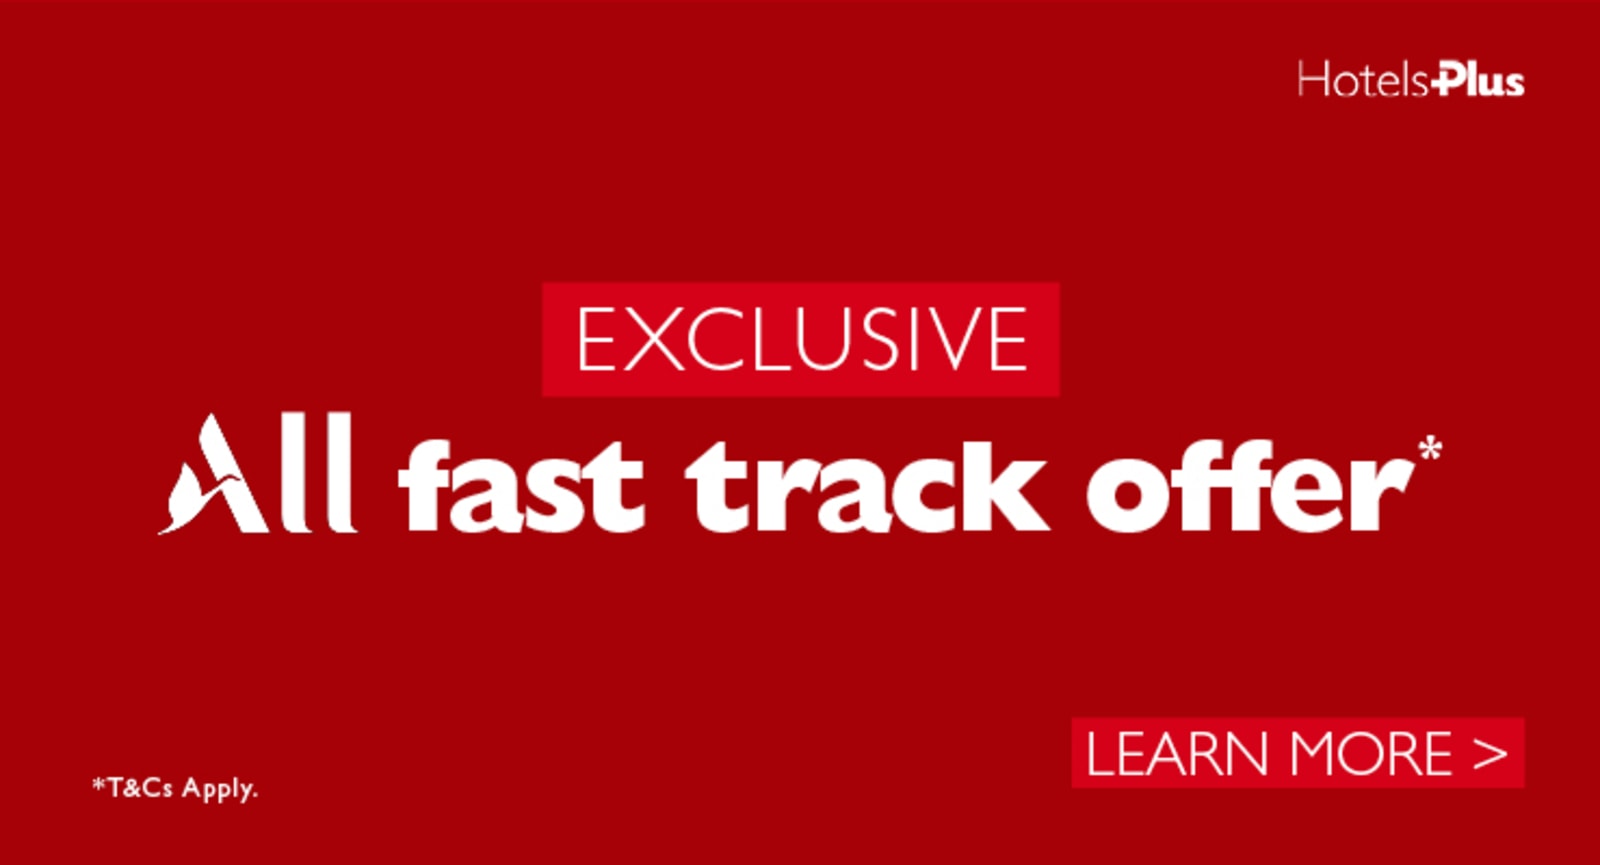 EXCLUSIVE | All fast tracker offer*